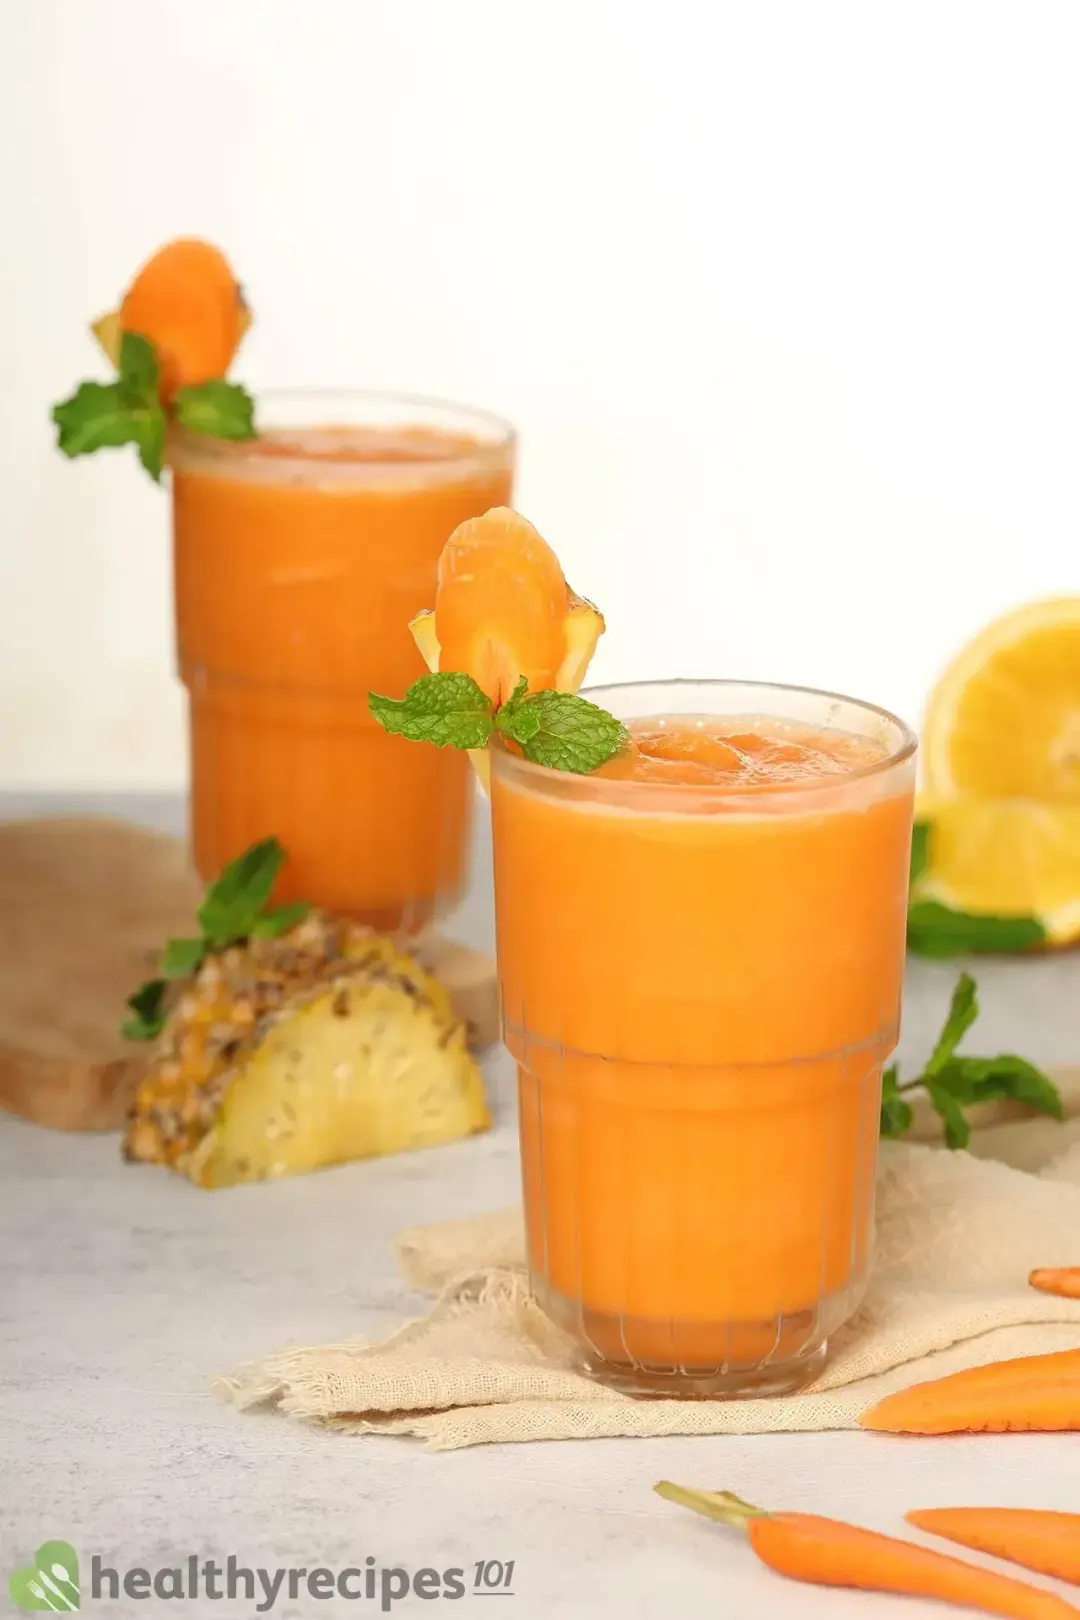 Storage and Freezing The Leftover Carrot Smoothie